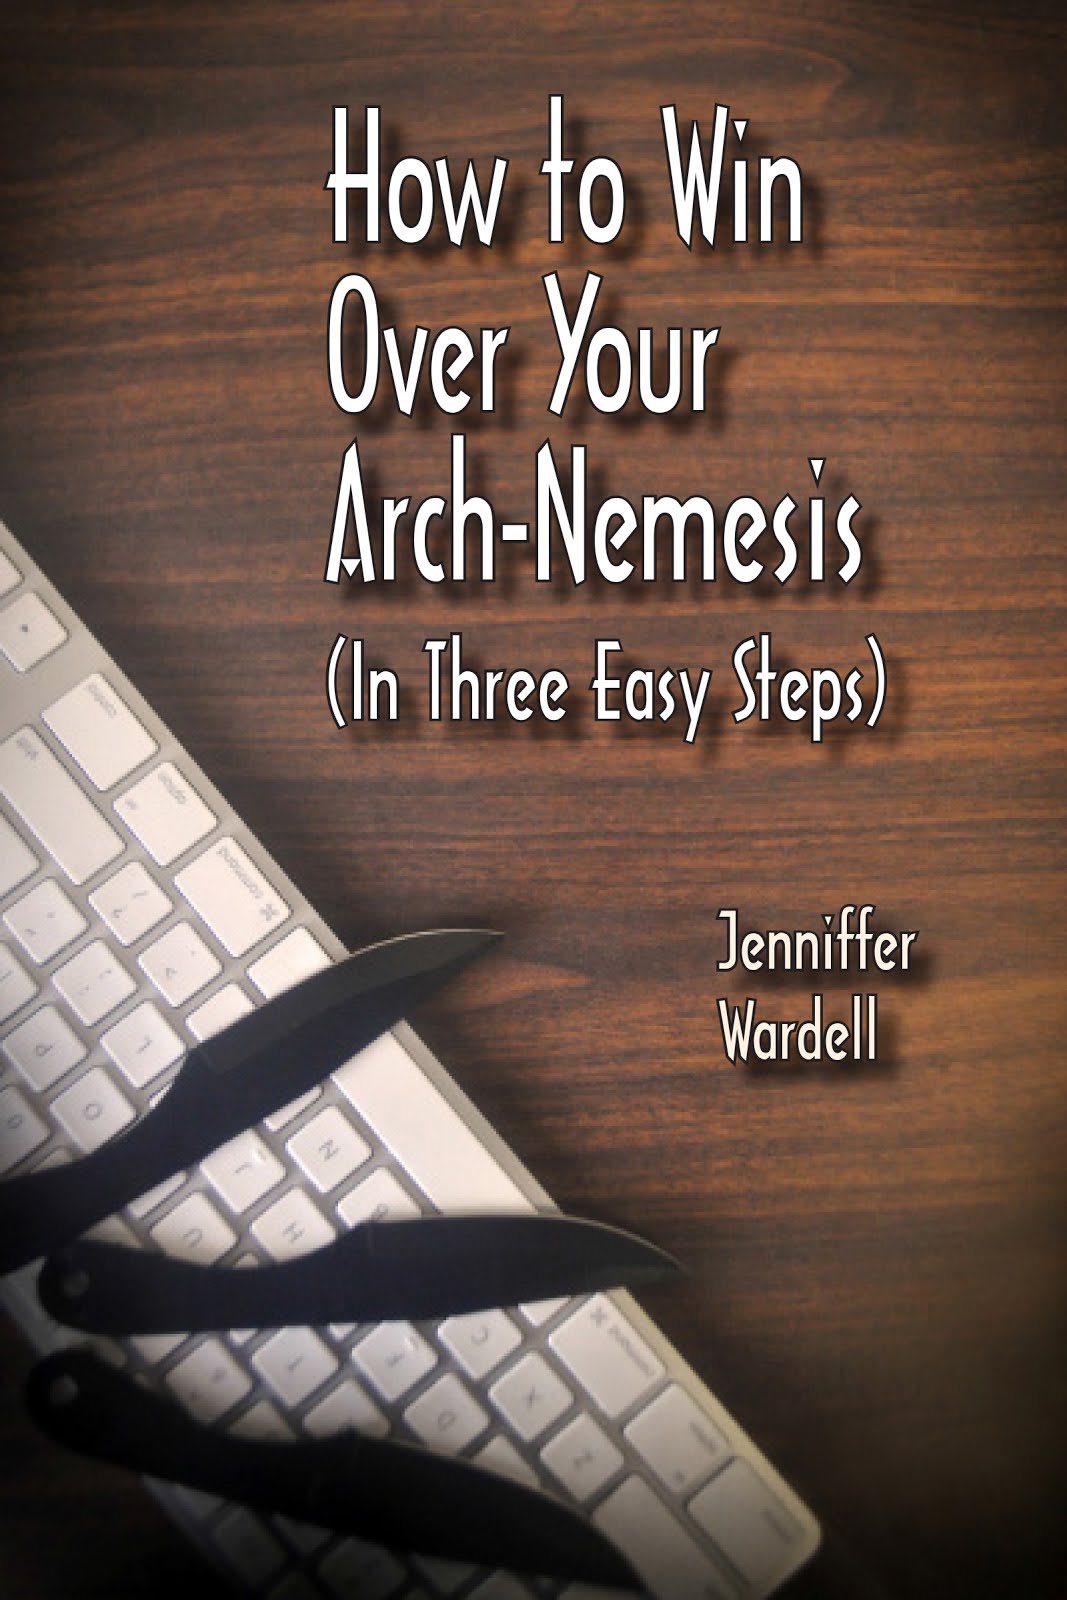 How to Win Over Your Arch-Nemesis (In Three Easy Steps) 99 cent e-book